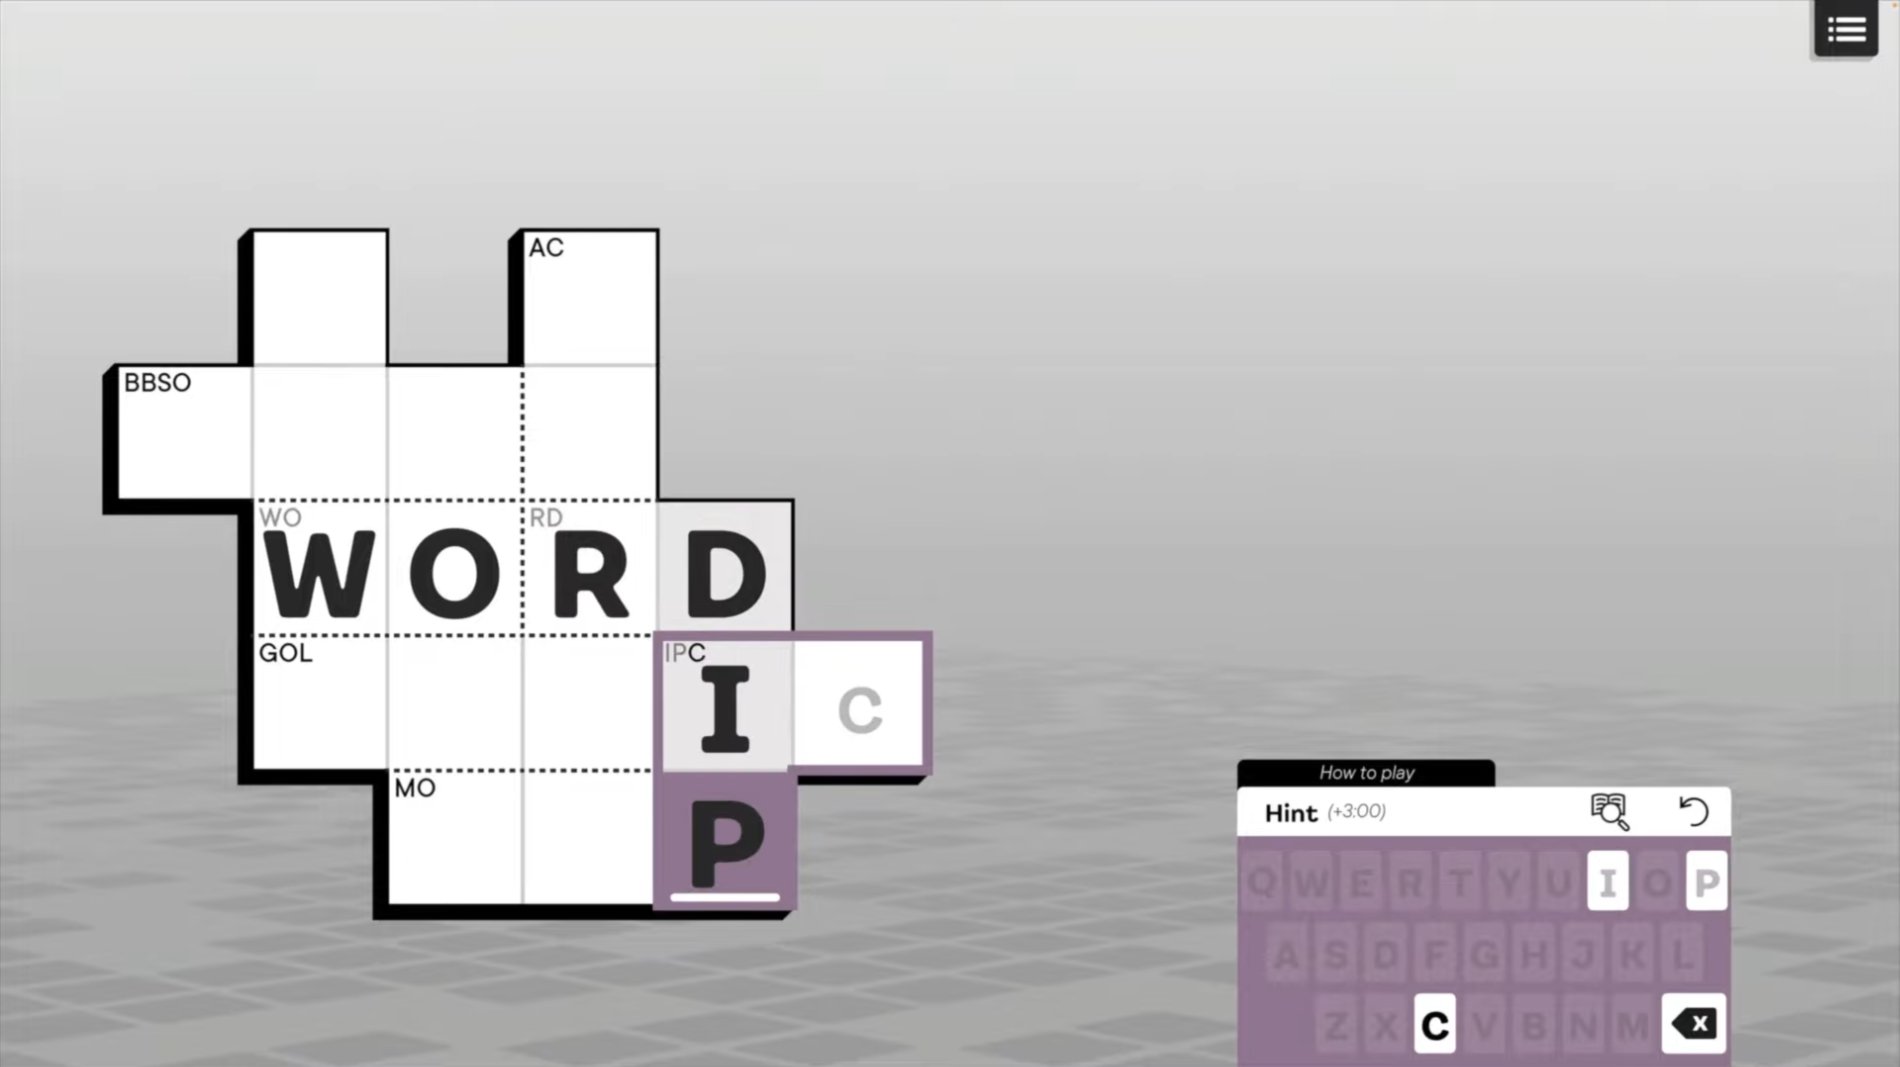 Knotwords is a New and Unique Word Game Taking Inspiration From Crossword Puzzles